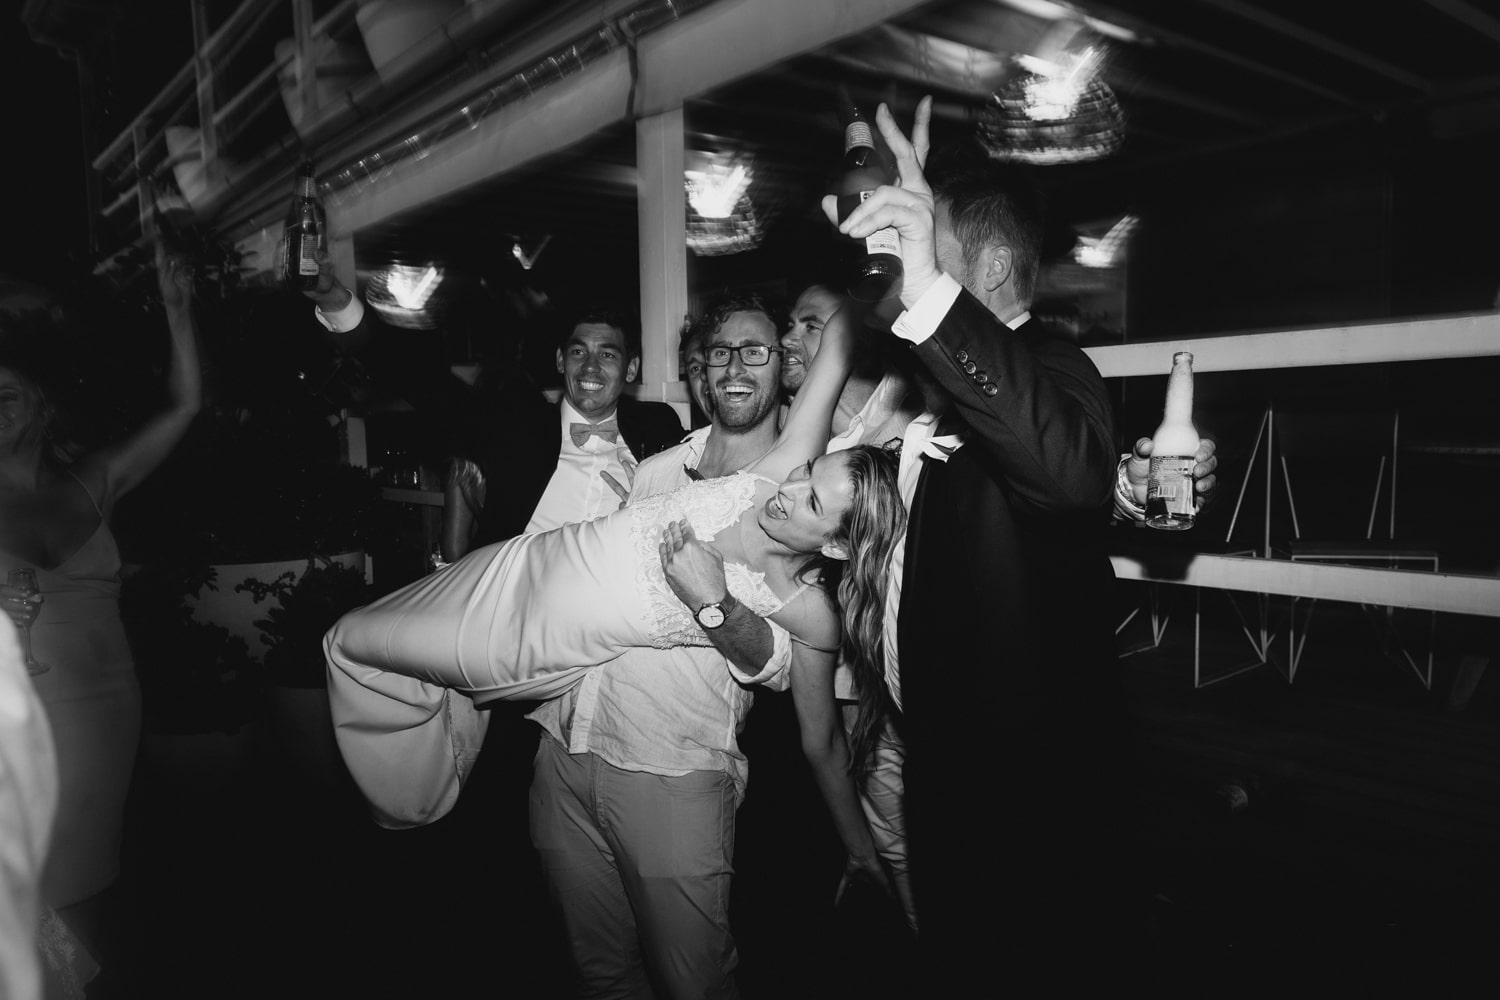 guests lifting the bride up - palm beach wedding